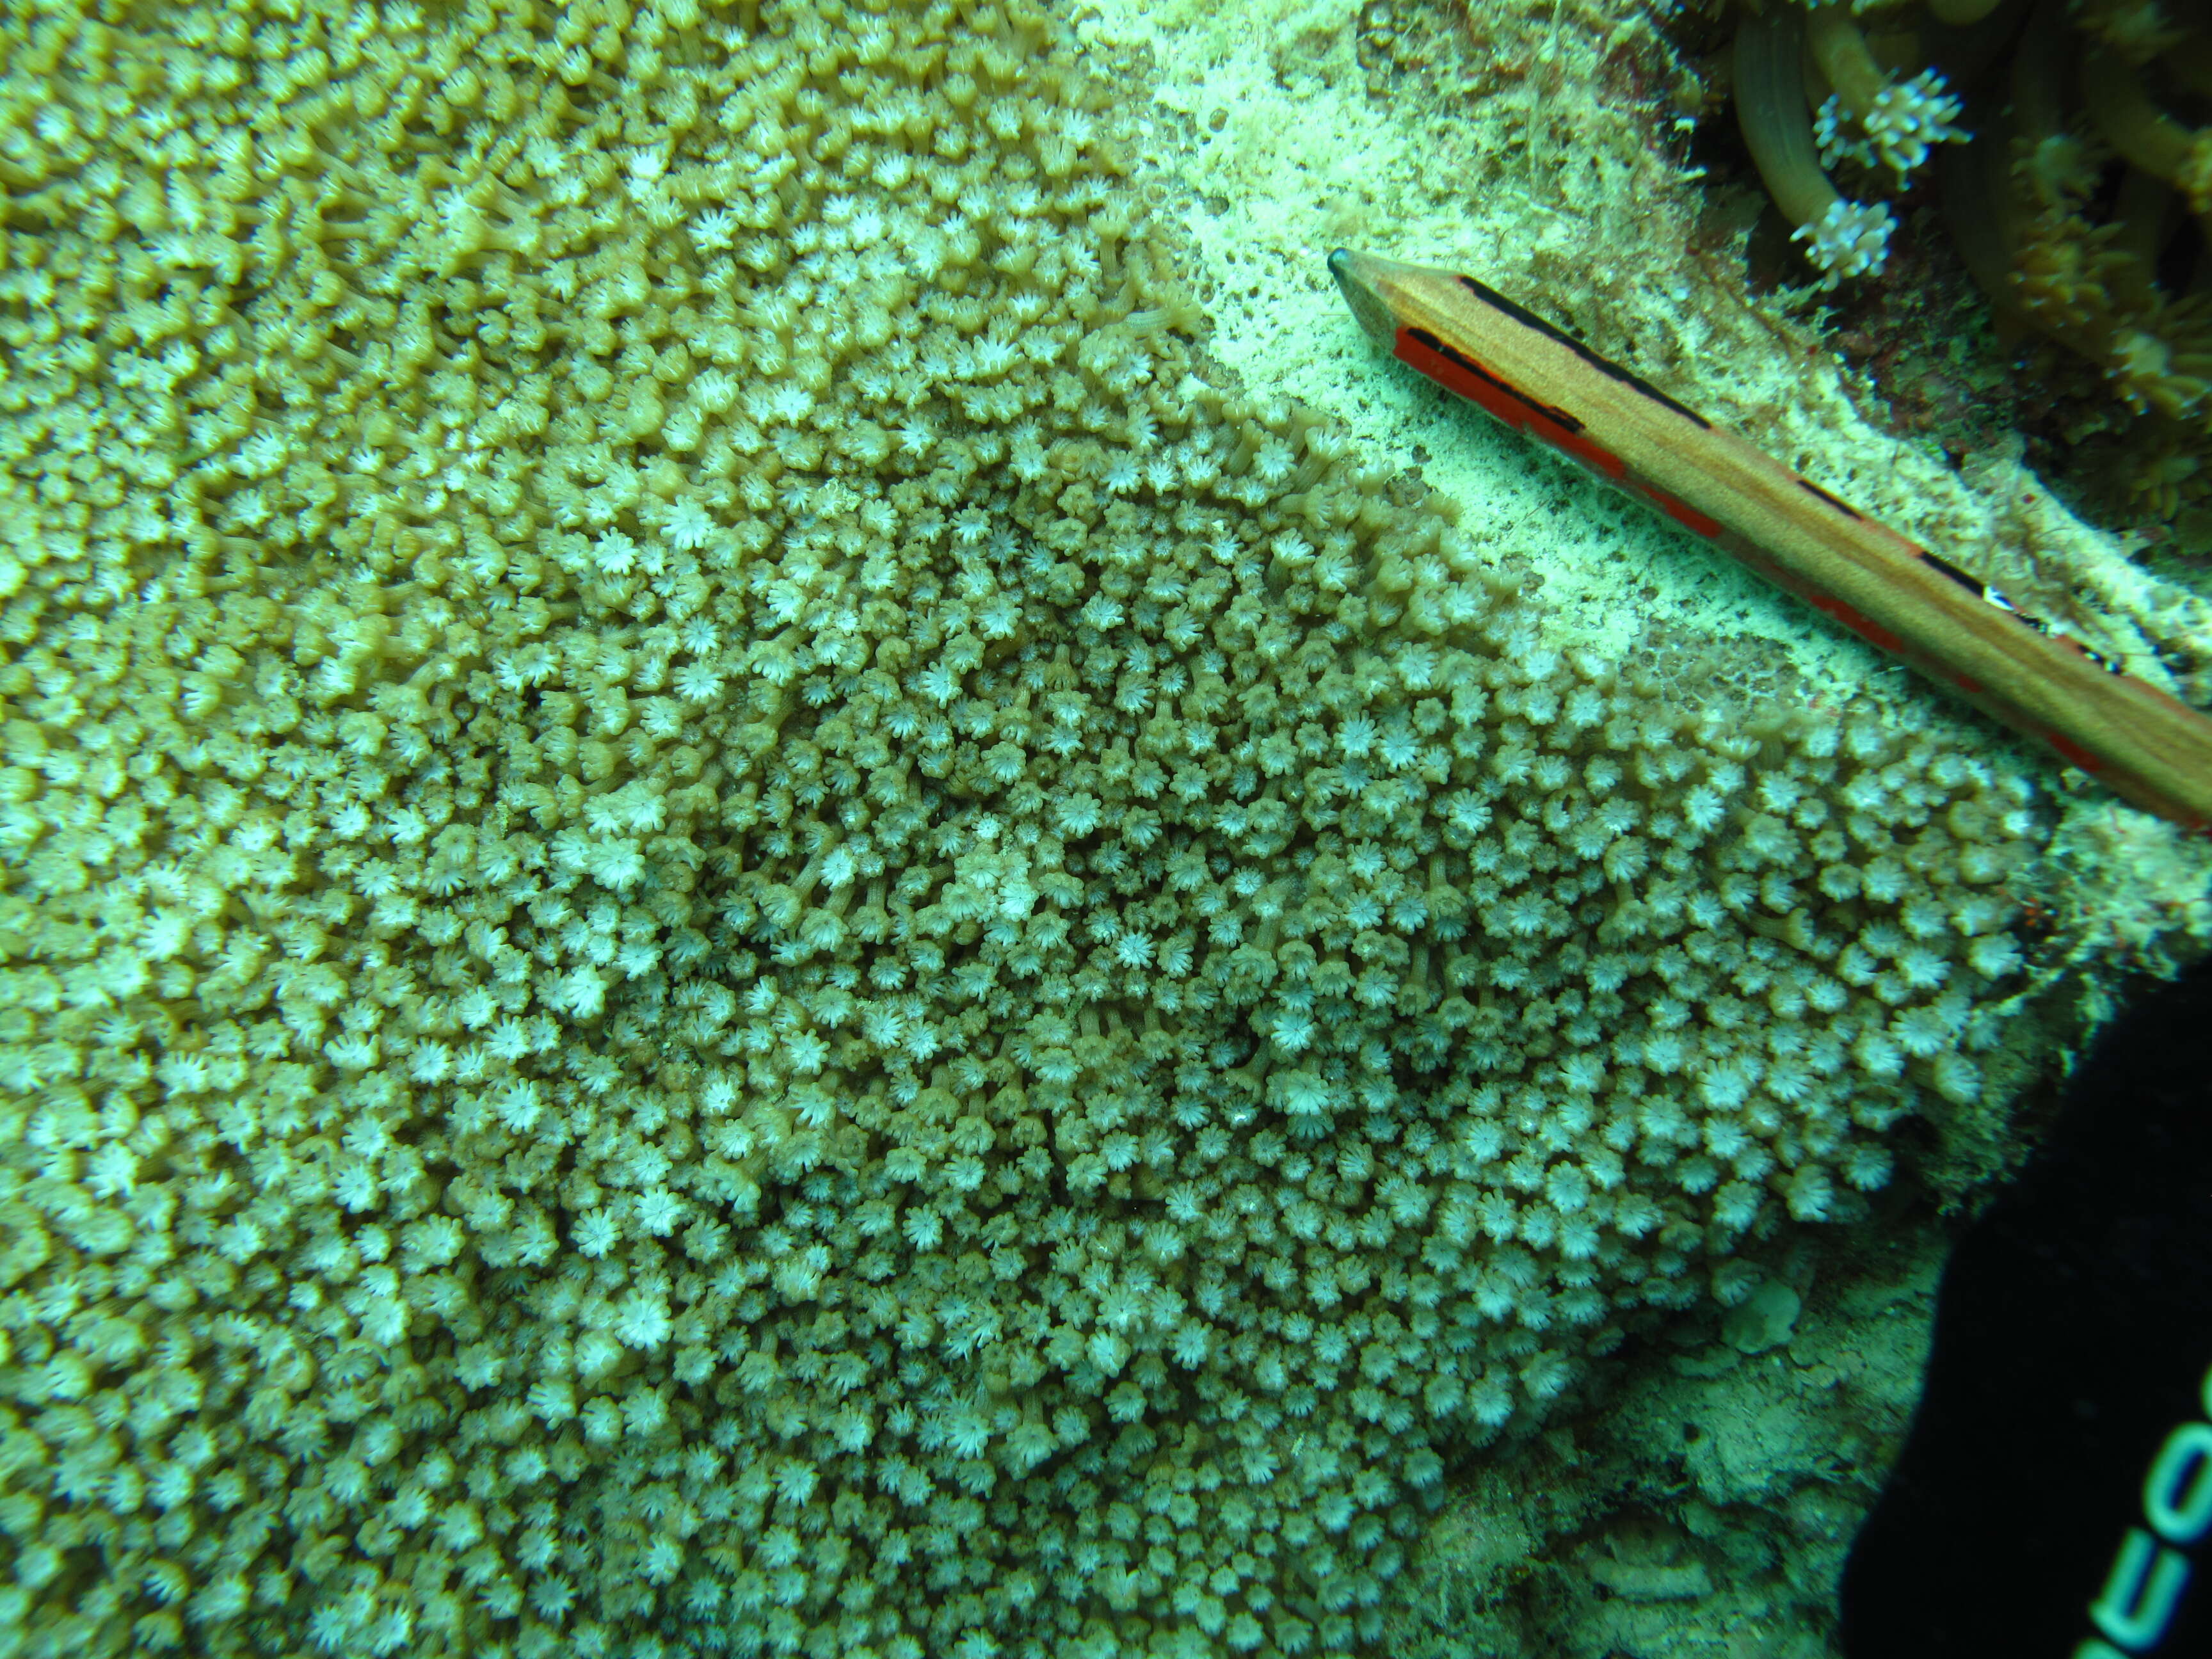 Image of Coral